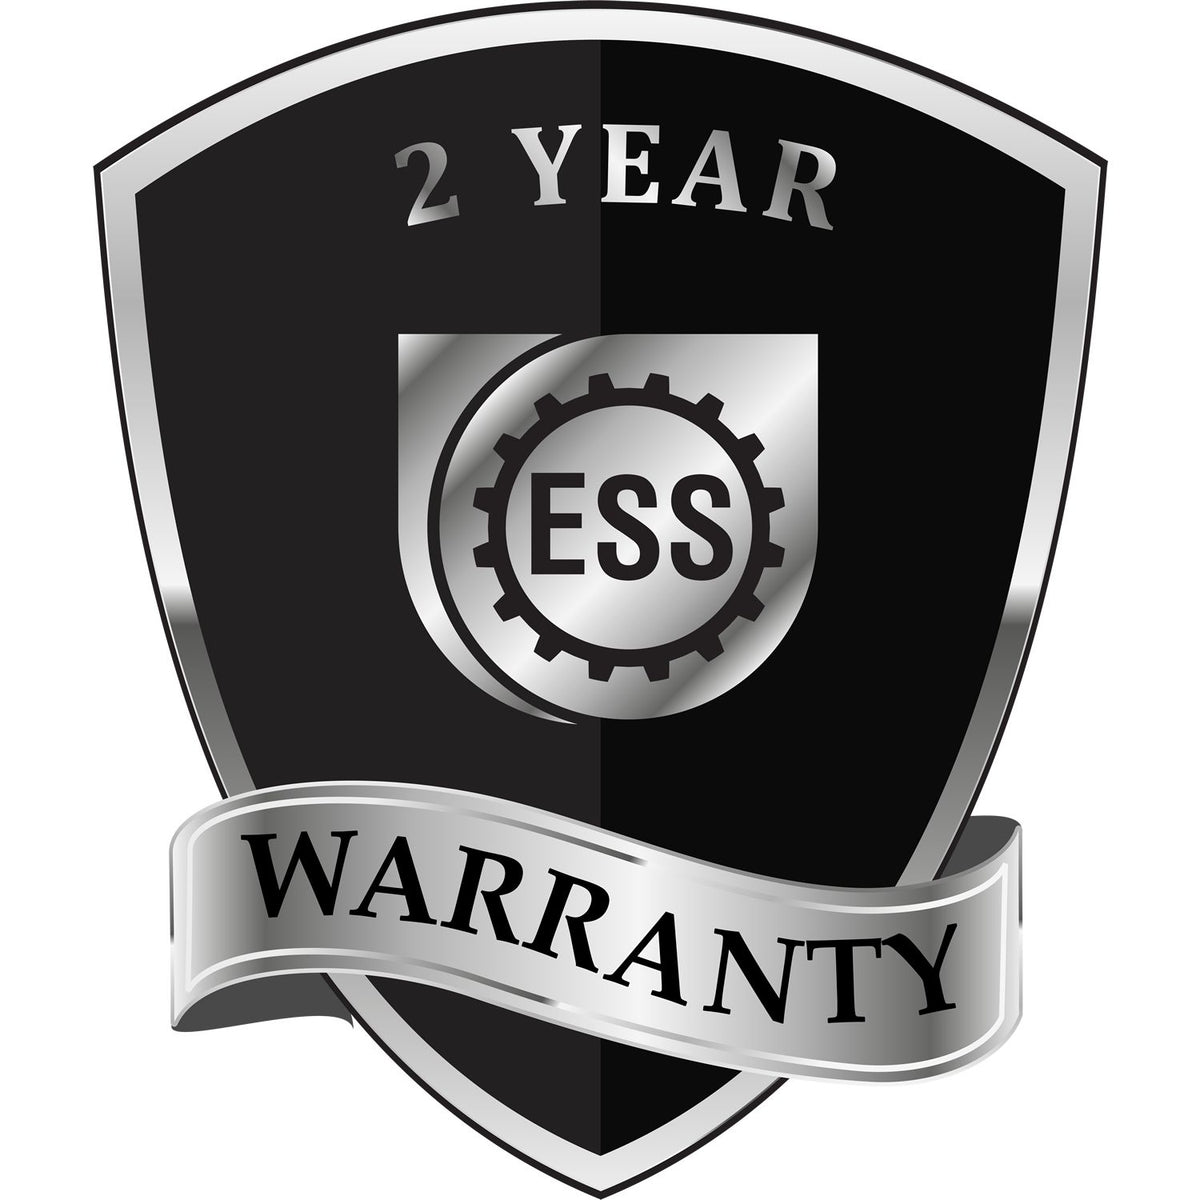 A black and silver badge or emblem showing warranty information for the Hybrid Illinois Engineer Seal